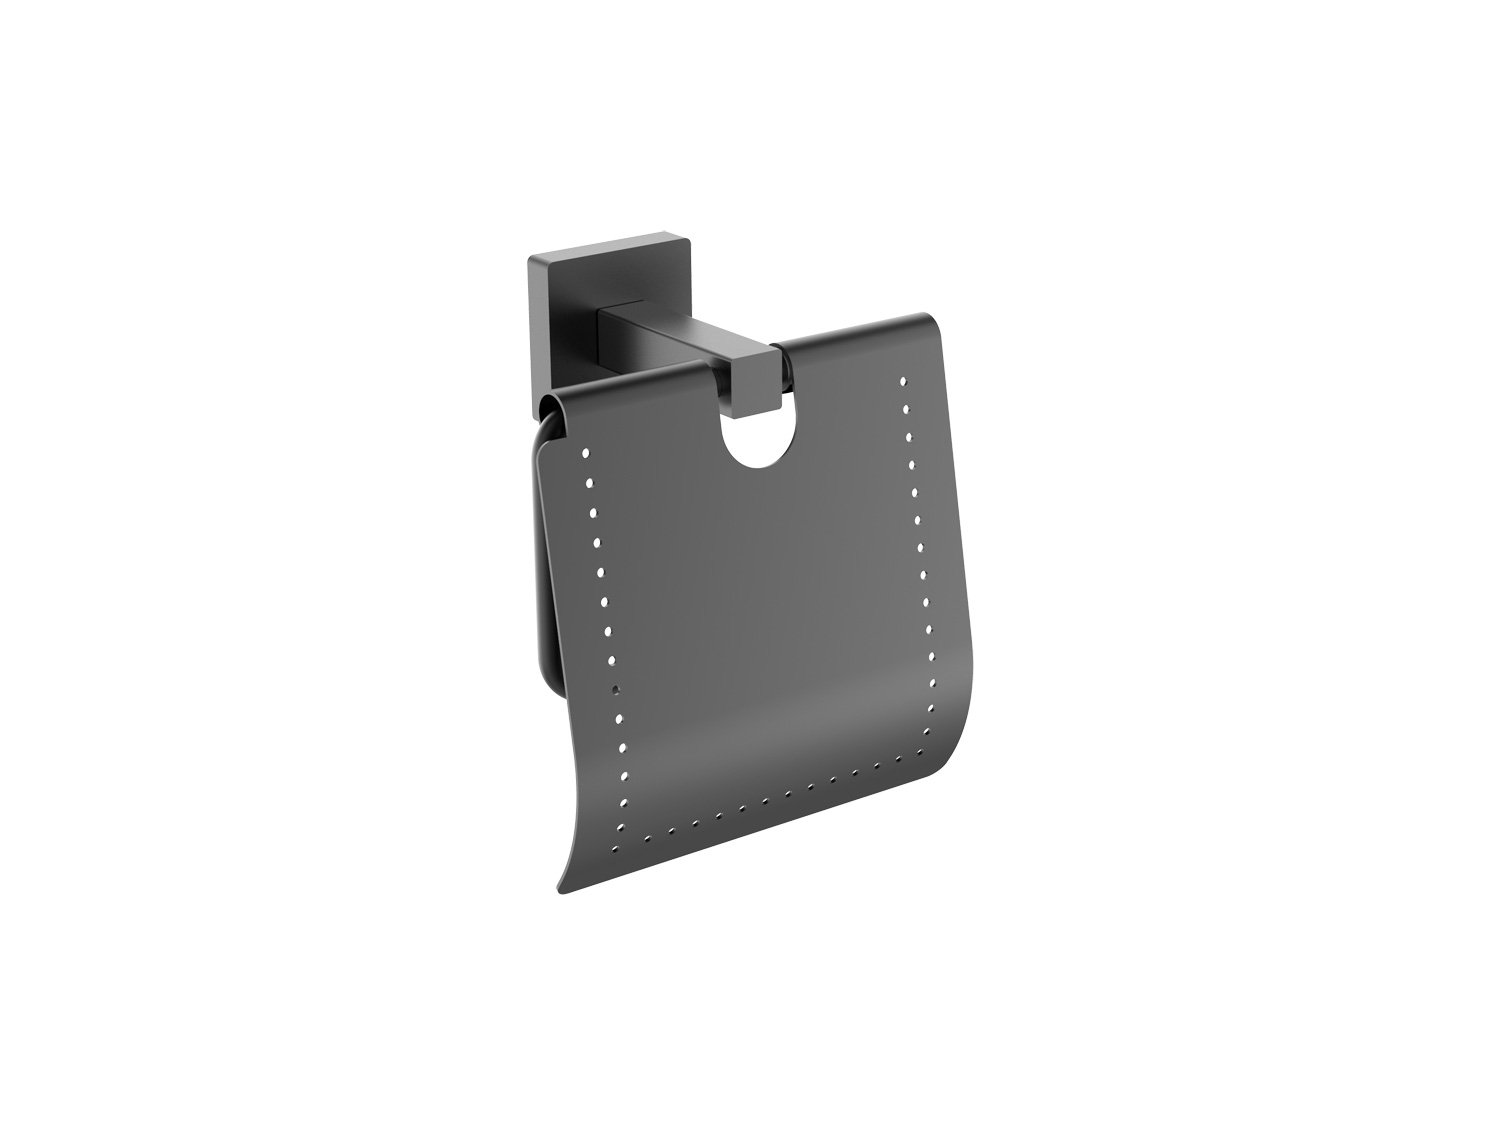 Cubo Black Toilet Paper Holder With Cover